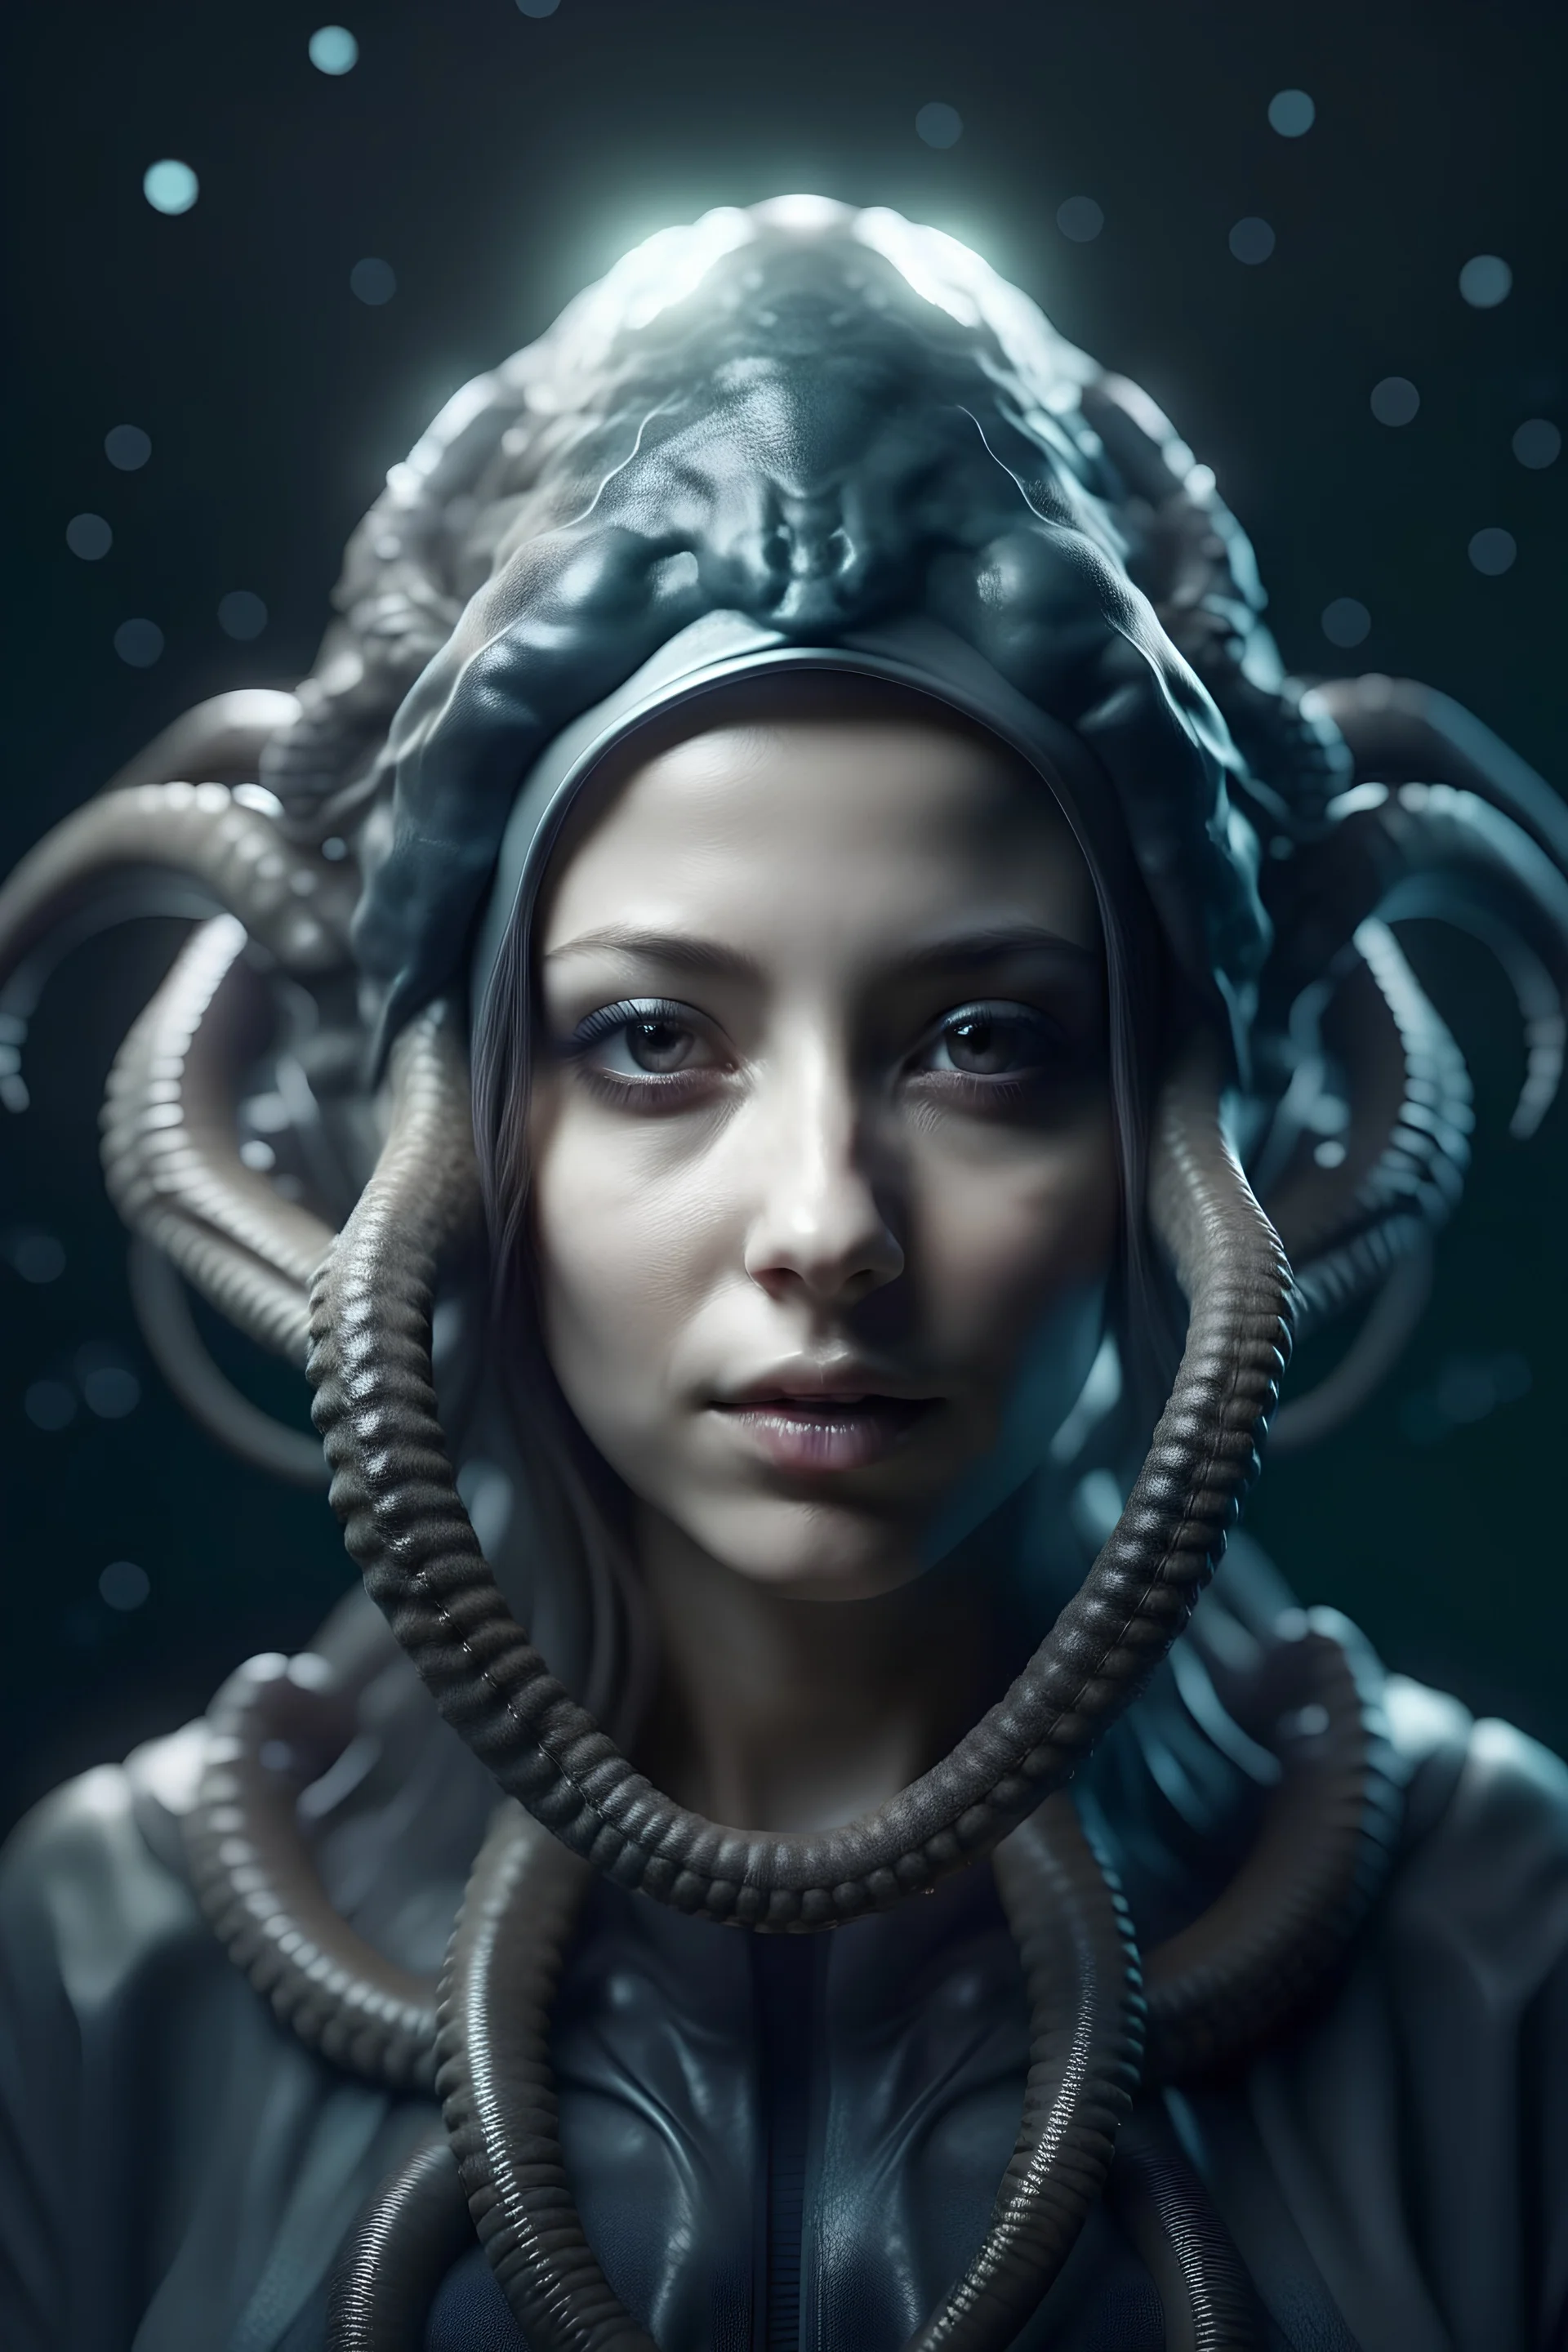 Realistic photolike looking Headshot of human female character with two psionic tentacles on head without eyes. Set in spacefaring future.